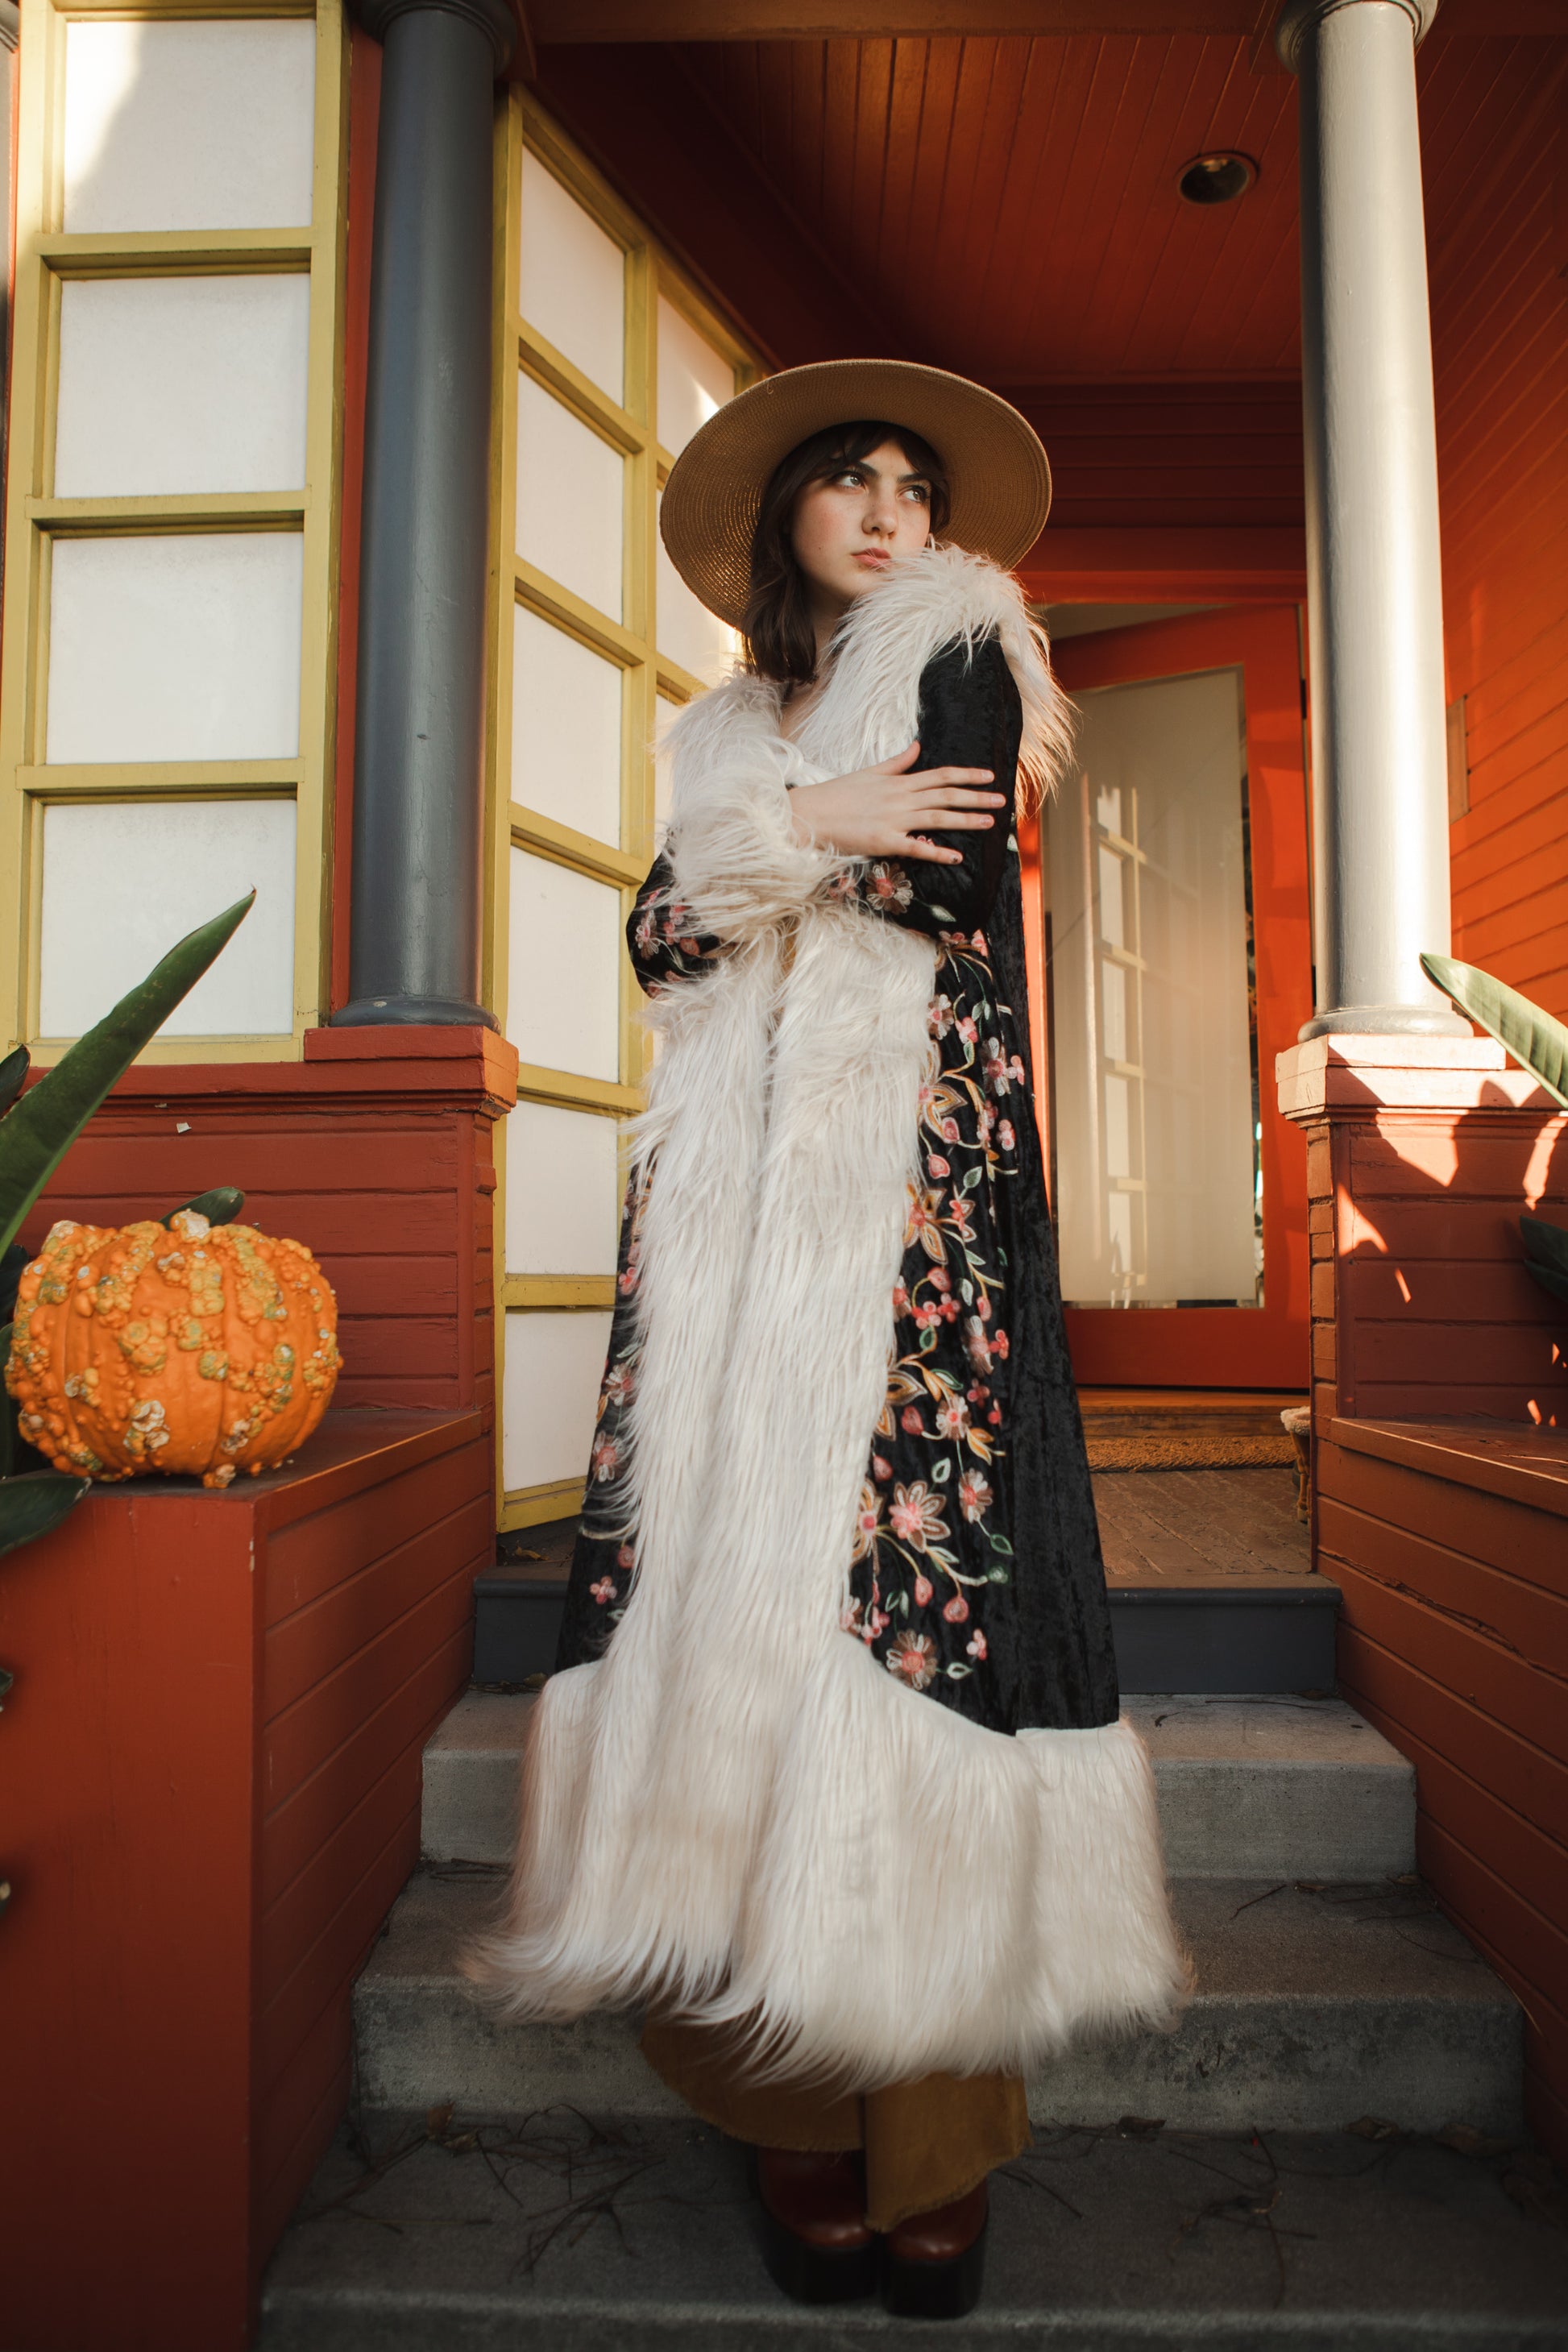 jennafer grace Harmony Embroidered Velvet deluxe penny lane faux fur duster jacket coat almost famous klaus hargreeves ivory cream faux fur dark floral embroidered velvet goth gothic boho bohemian hippie romantic whimsical retro opera coat 70s revival 1970s unisex handmade in California USA